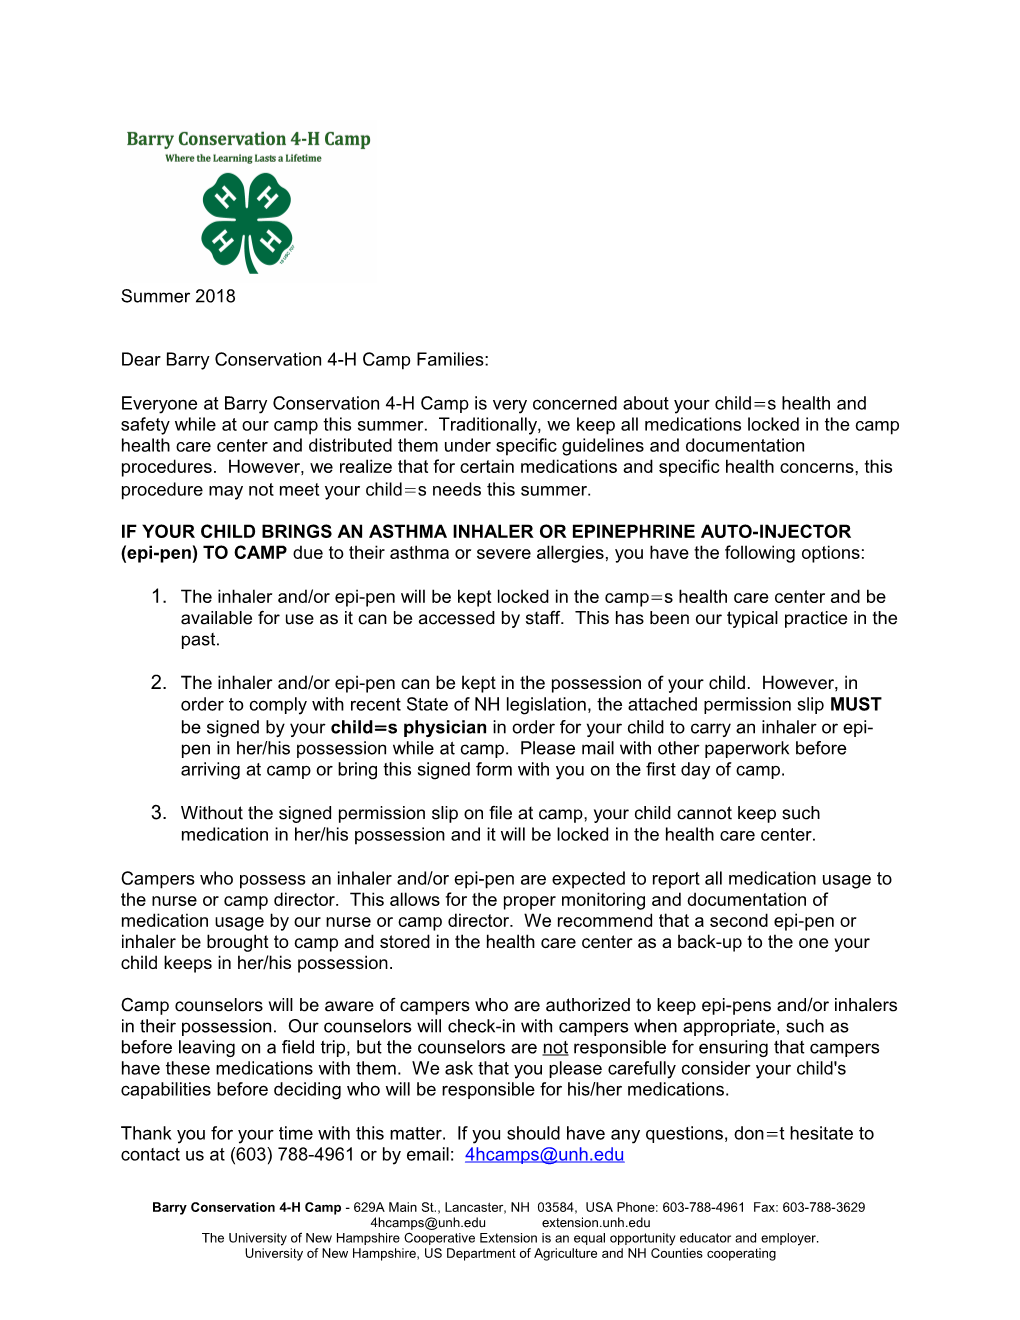 Dear Barry Conservation 4-H Camp Families